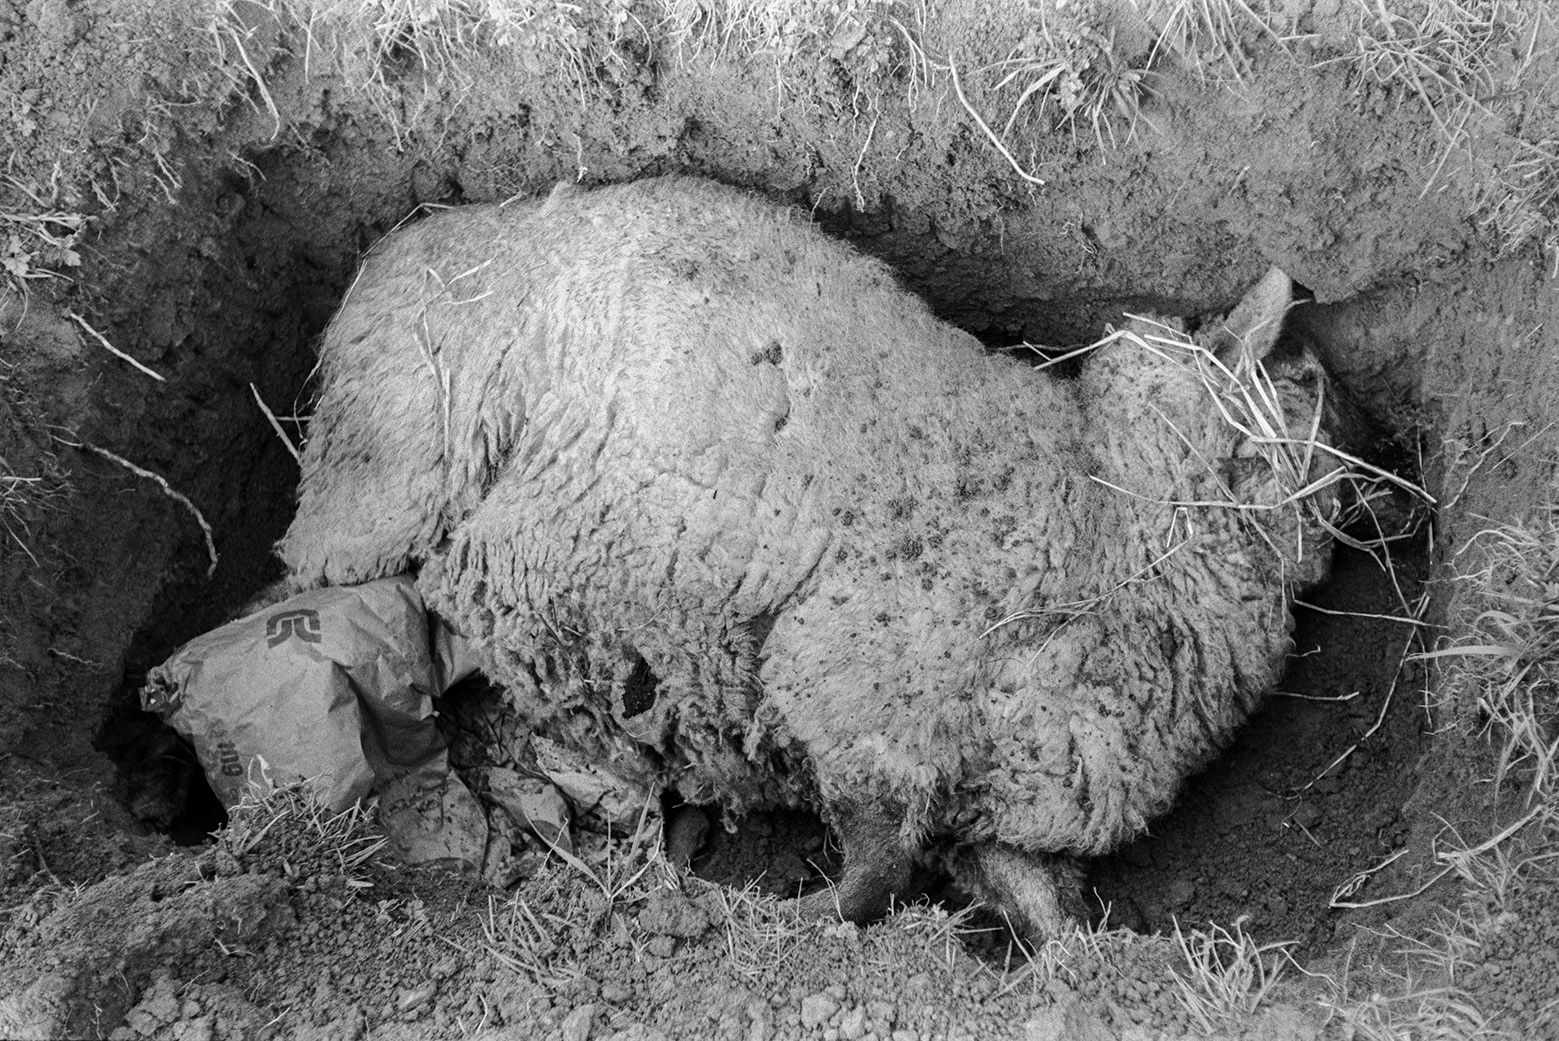 Dead sheep being buried in a hold in a field at Mill Road Farm, Beaford. The farm was also known as Jeffrys.